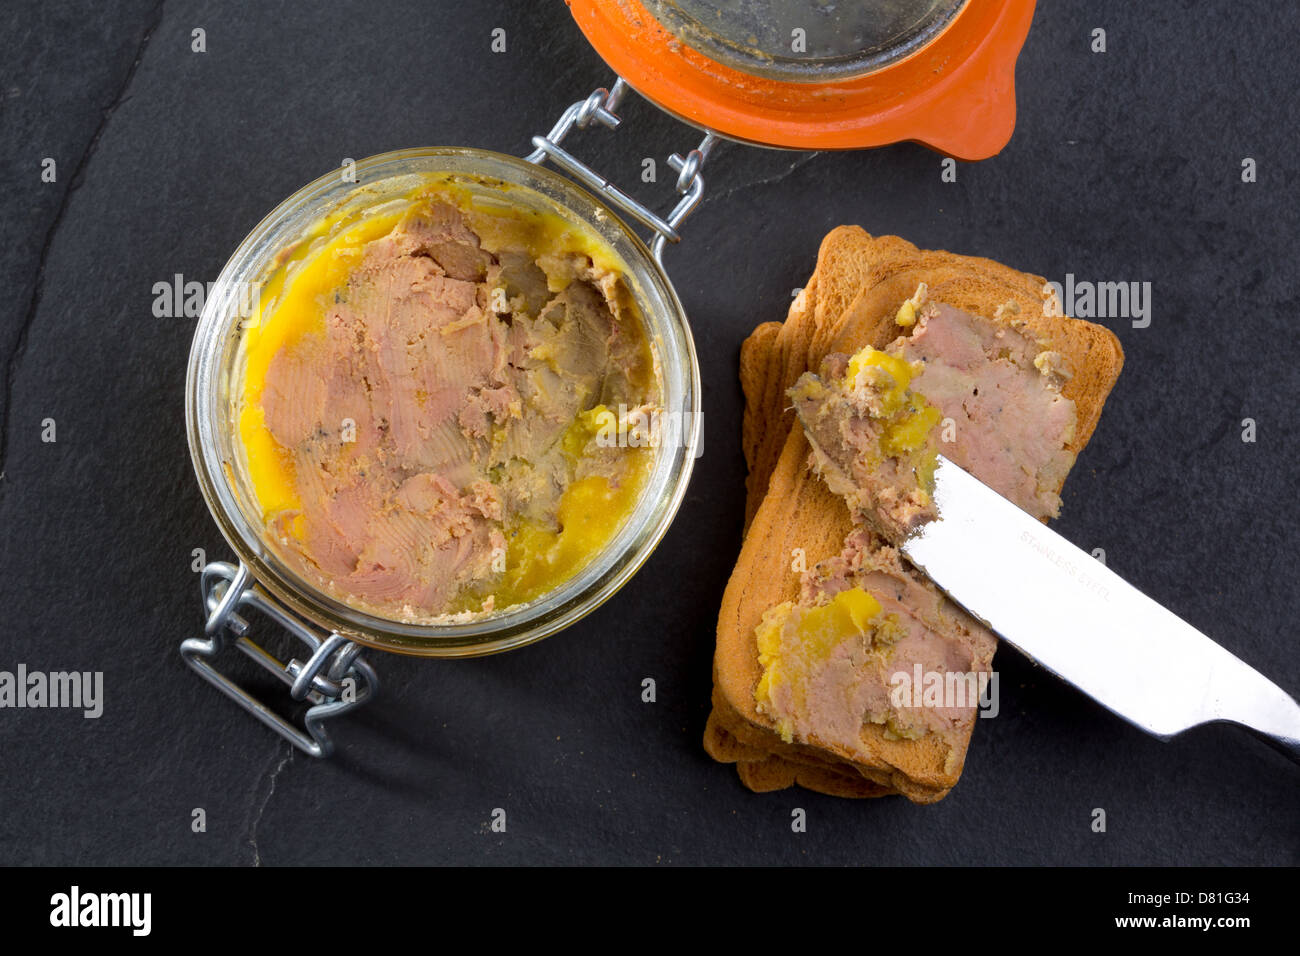 Canard Foie gras Pate made of the liver of a duck or goose with toasted  bread slices Stock Photo - Alamy